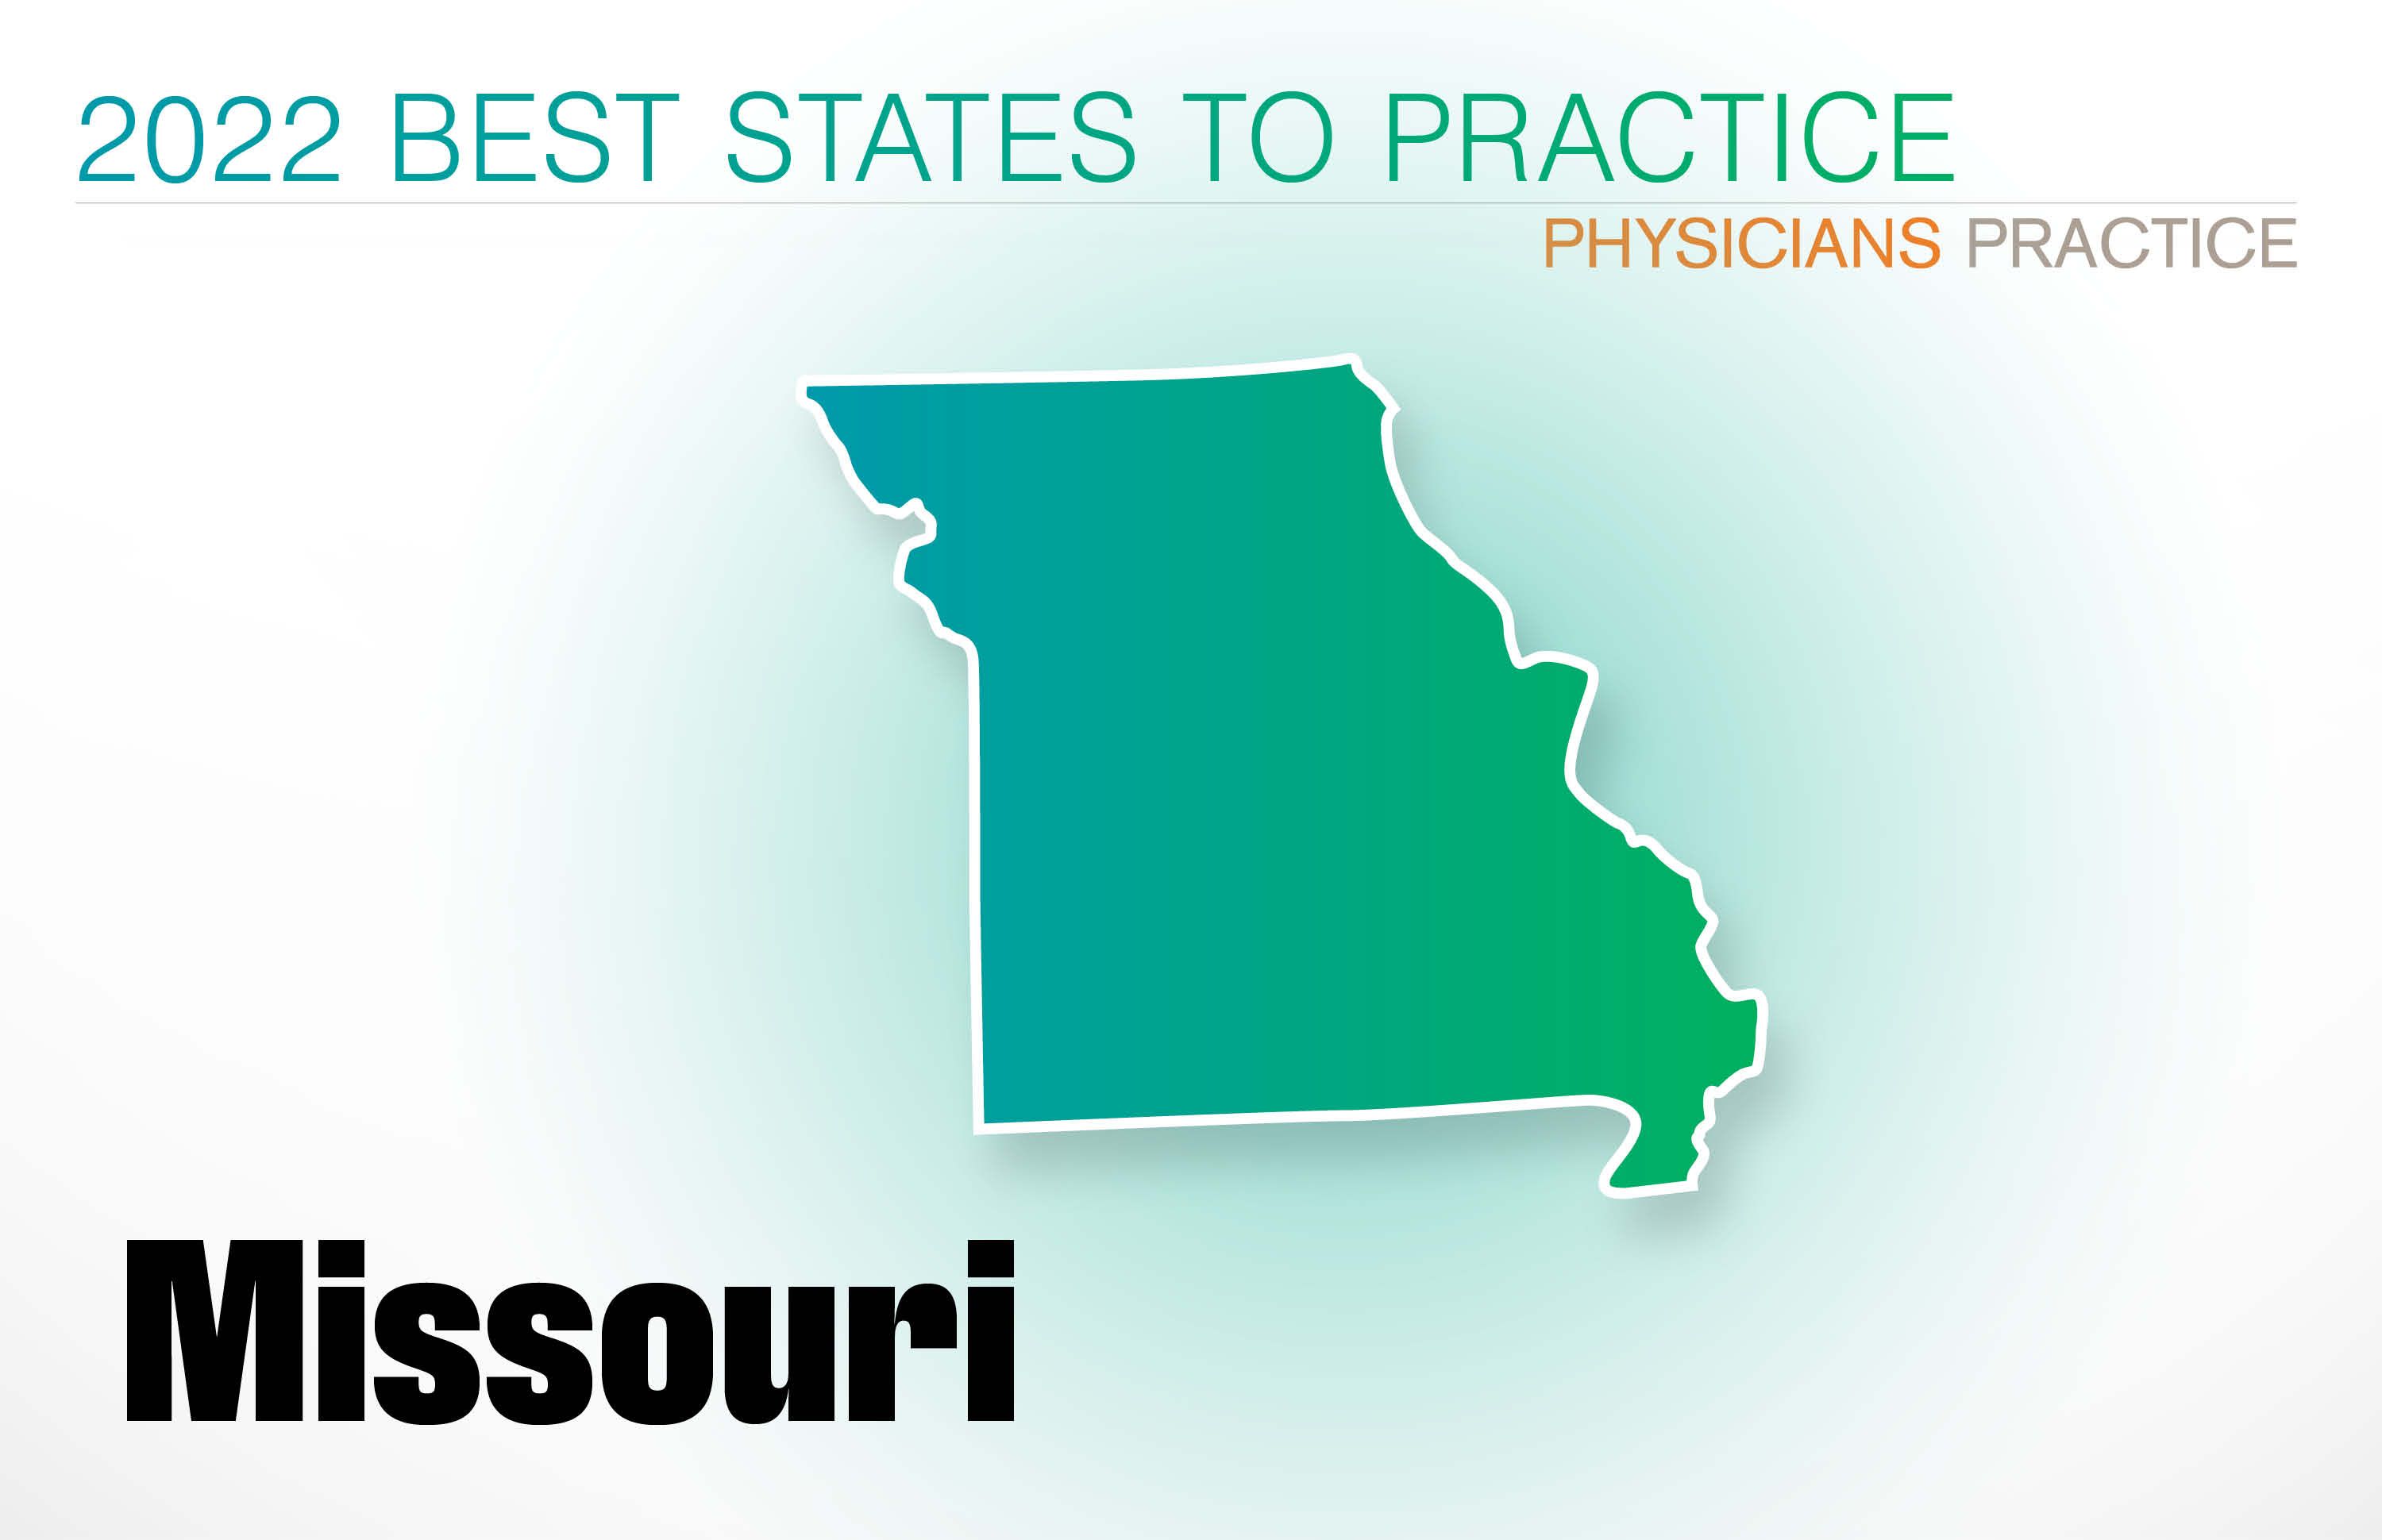 #20 Missouri Rankings: Cost of living: 12 Physician density: 35 Amount of state business taxes collected: 13 Average malpractice insurance rates: 29 Quality of life: 17 GPCI: 22